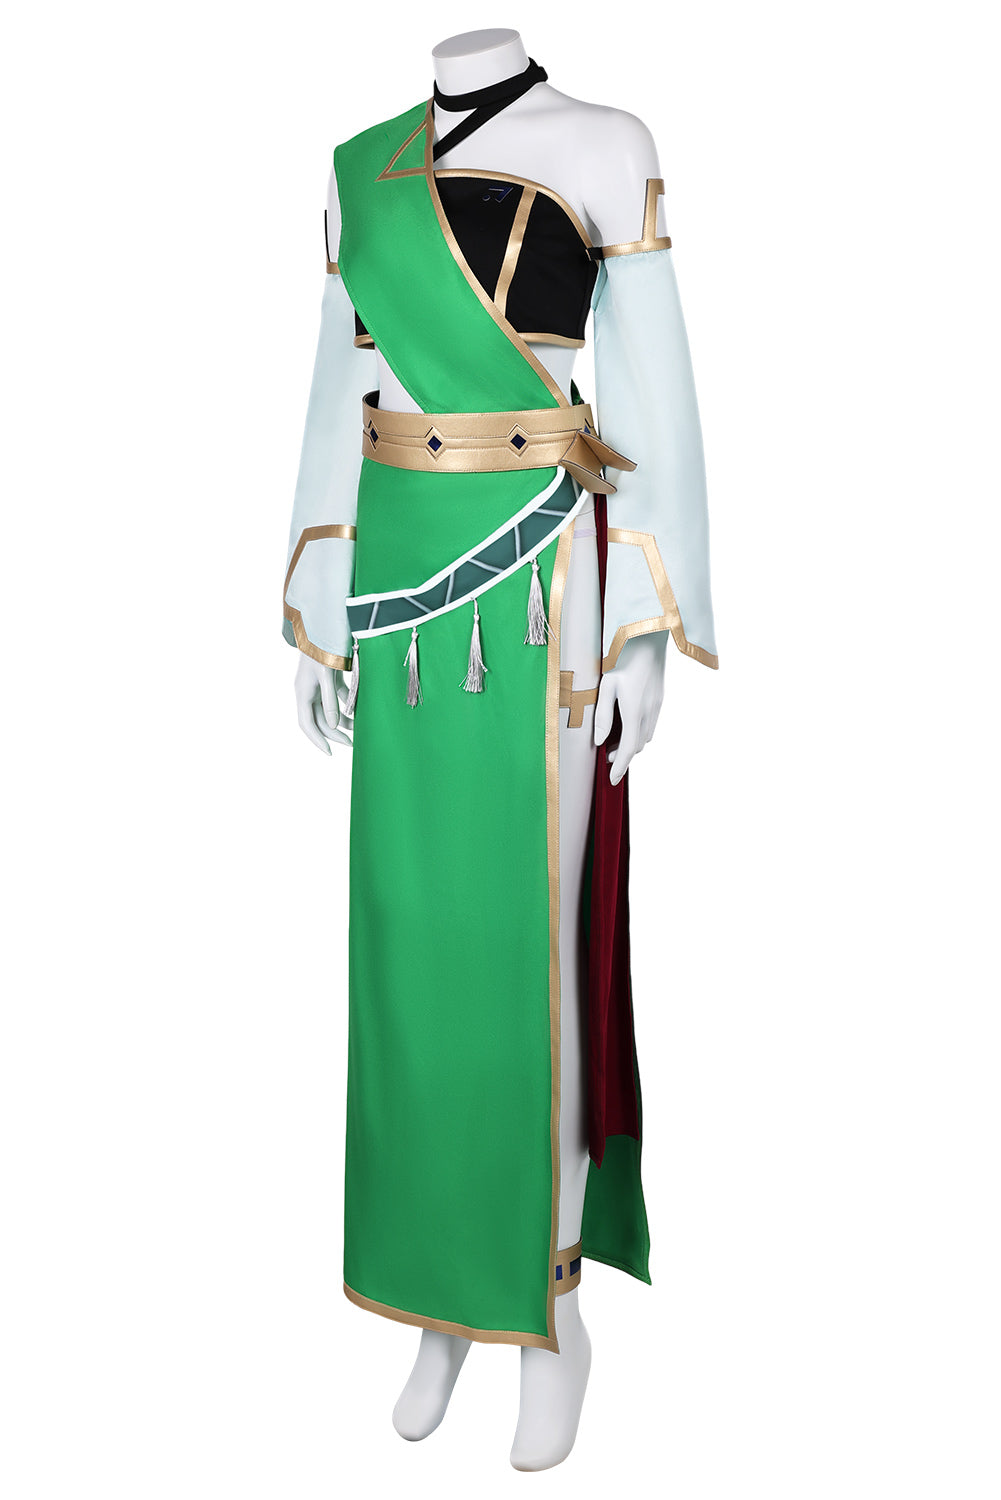 SeeCosplay Game Palworld Lily Outfits Halloween Carnival Suit Cosplay Costume